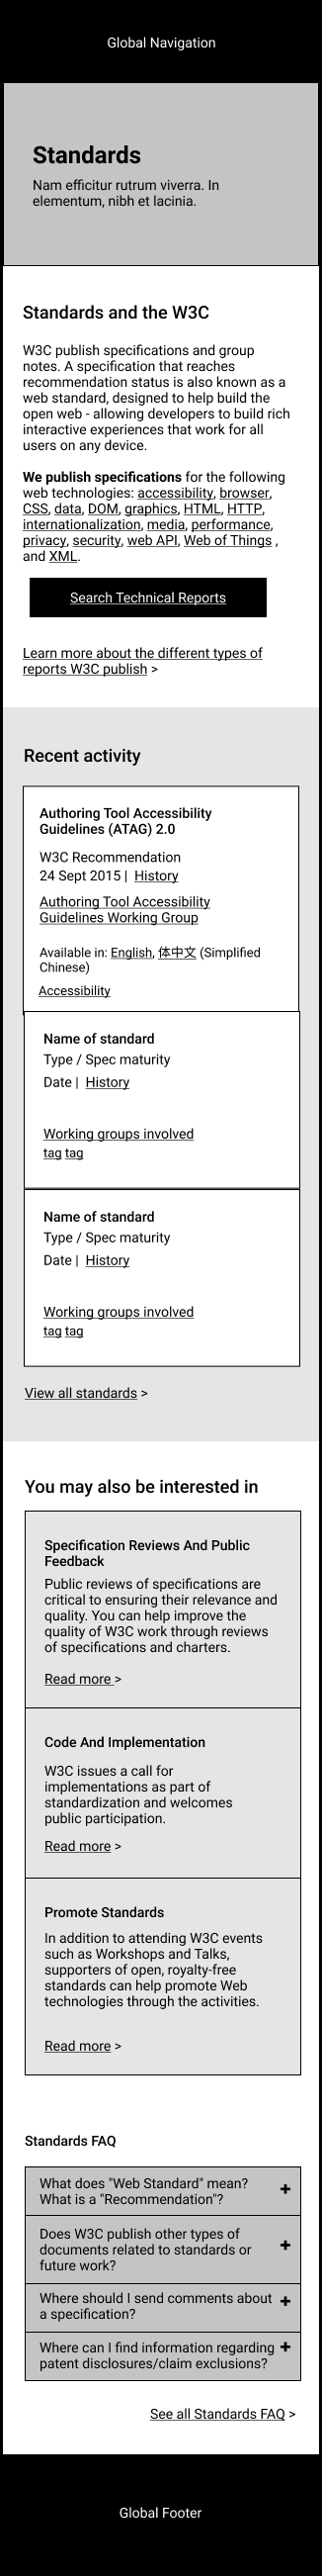 Content wireframe of Standards page